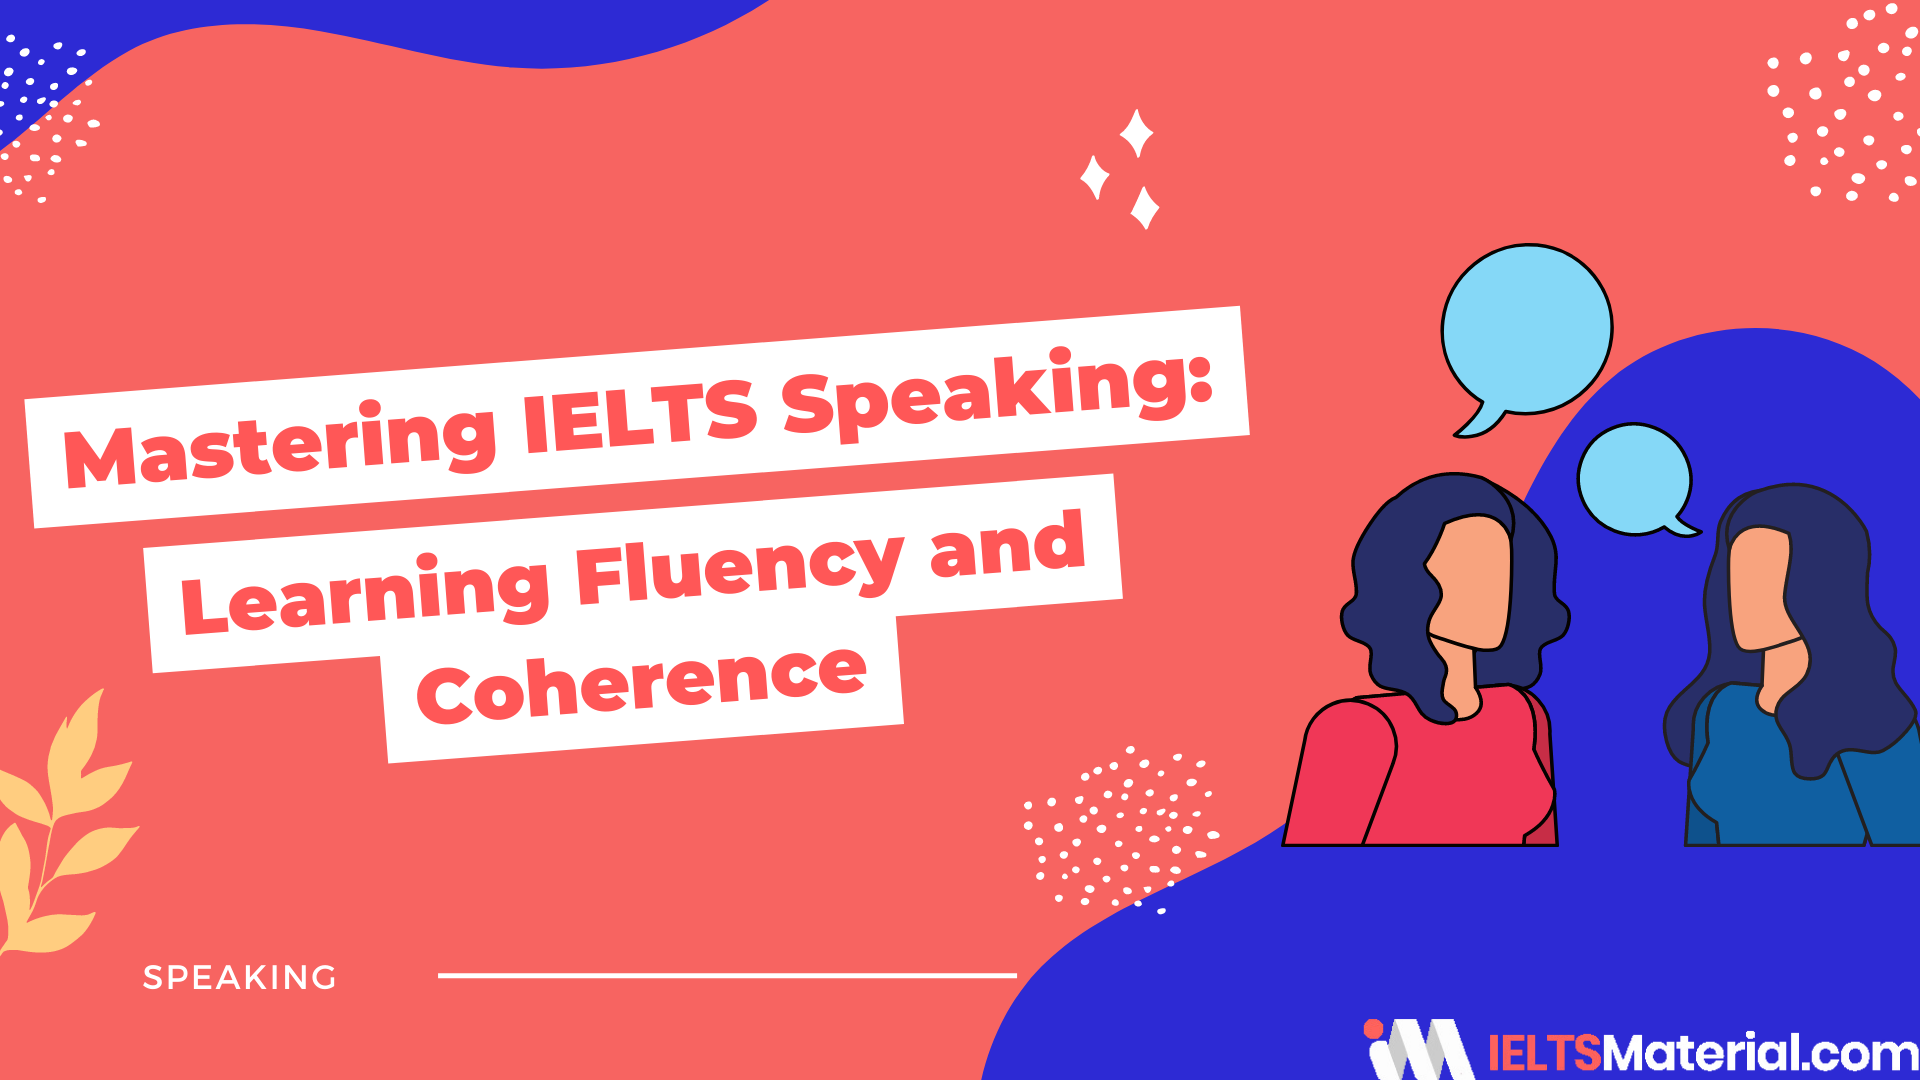 Mastering IELTS Speaking: Learning Fluency and Coherence